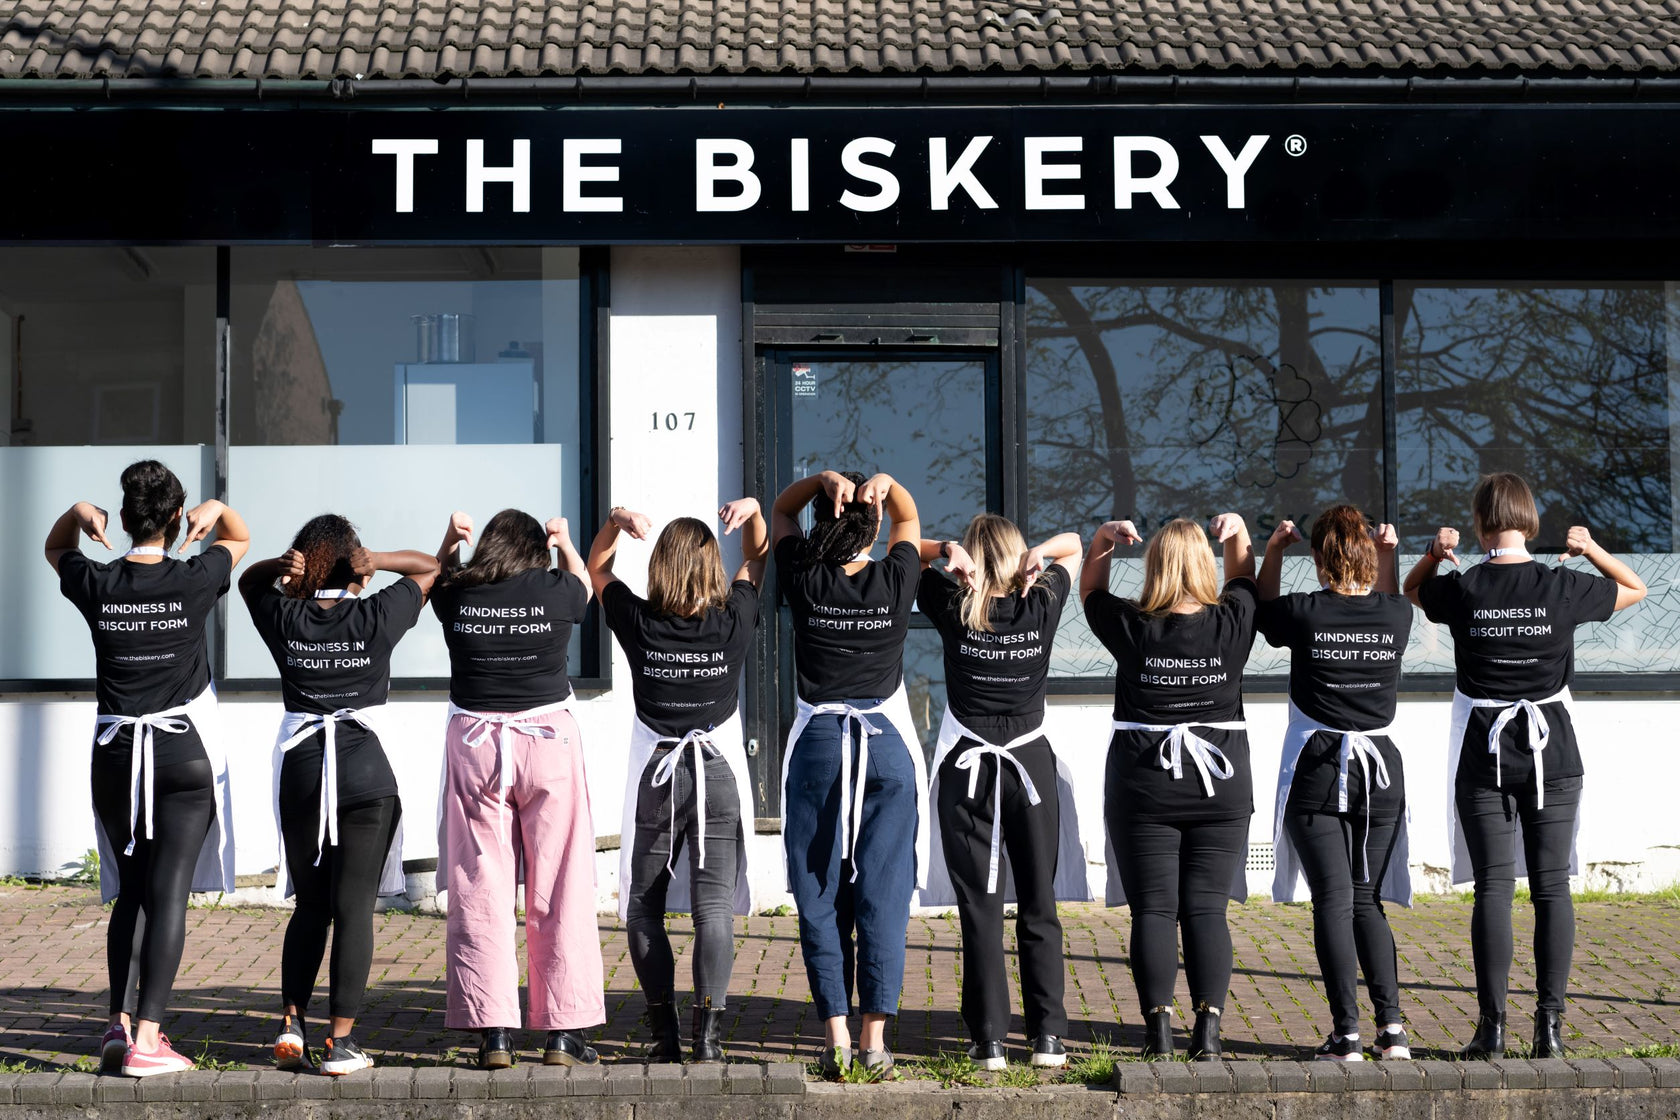 The Biskery employees lined up wearing their Kindness in Biscuit form T-shirts